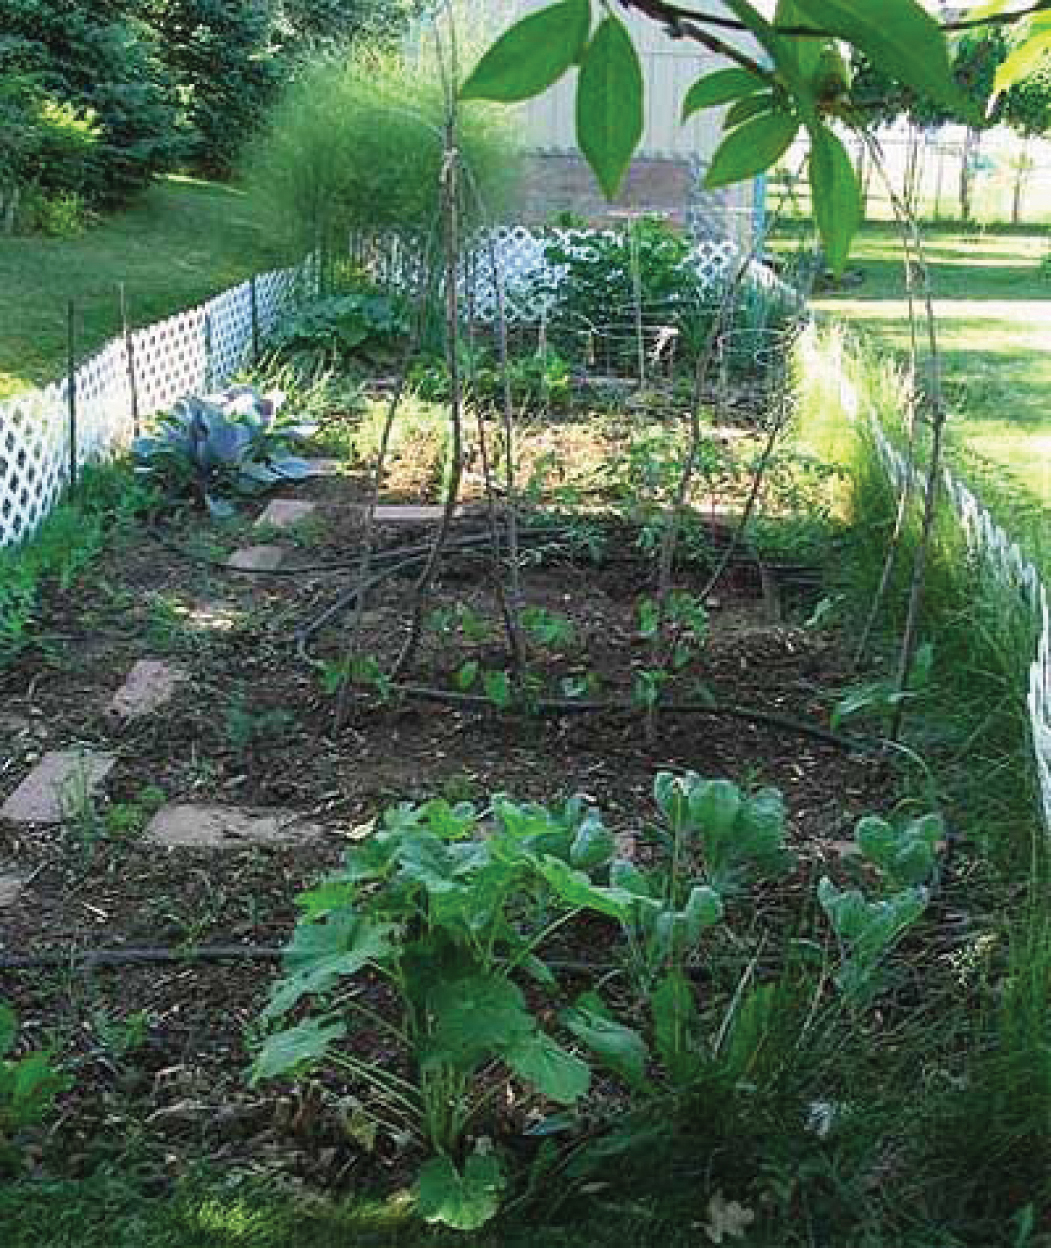 Vegetable Varieties for Container Planting – Arapahoe County Extension